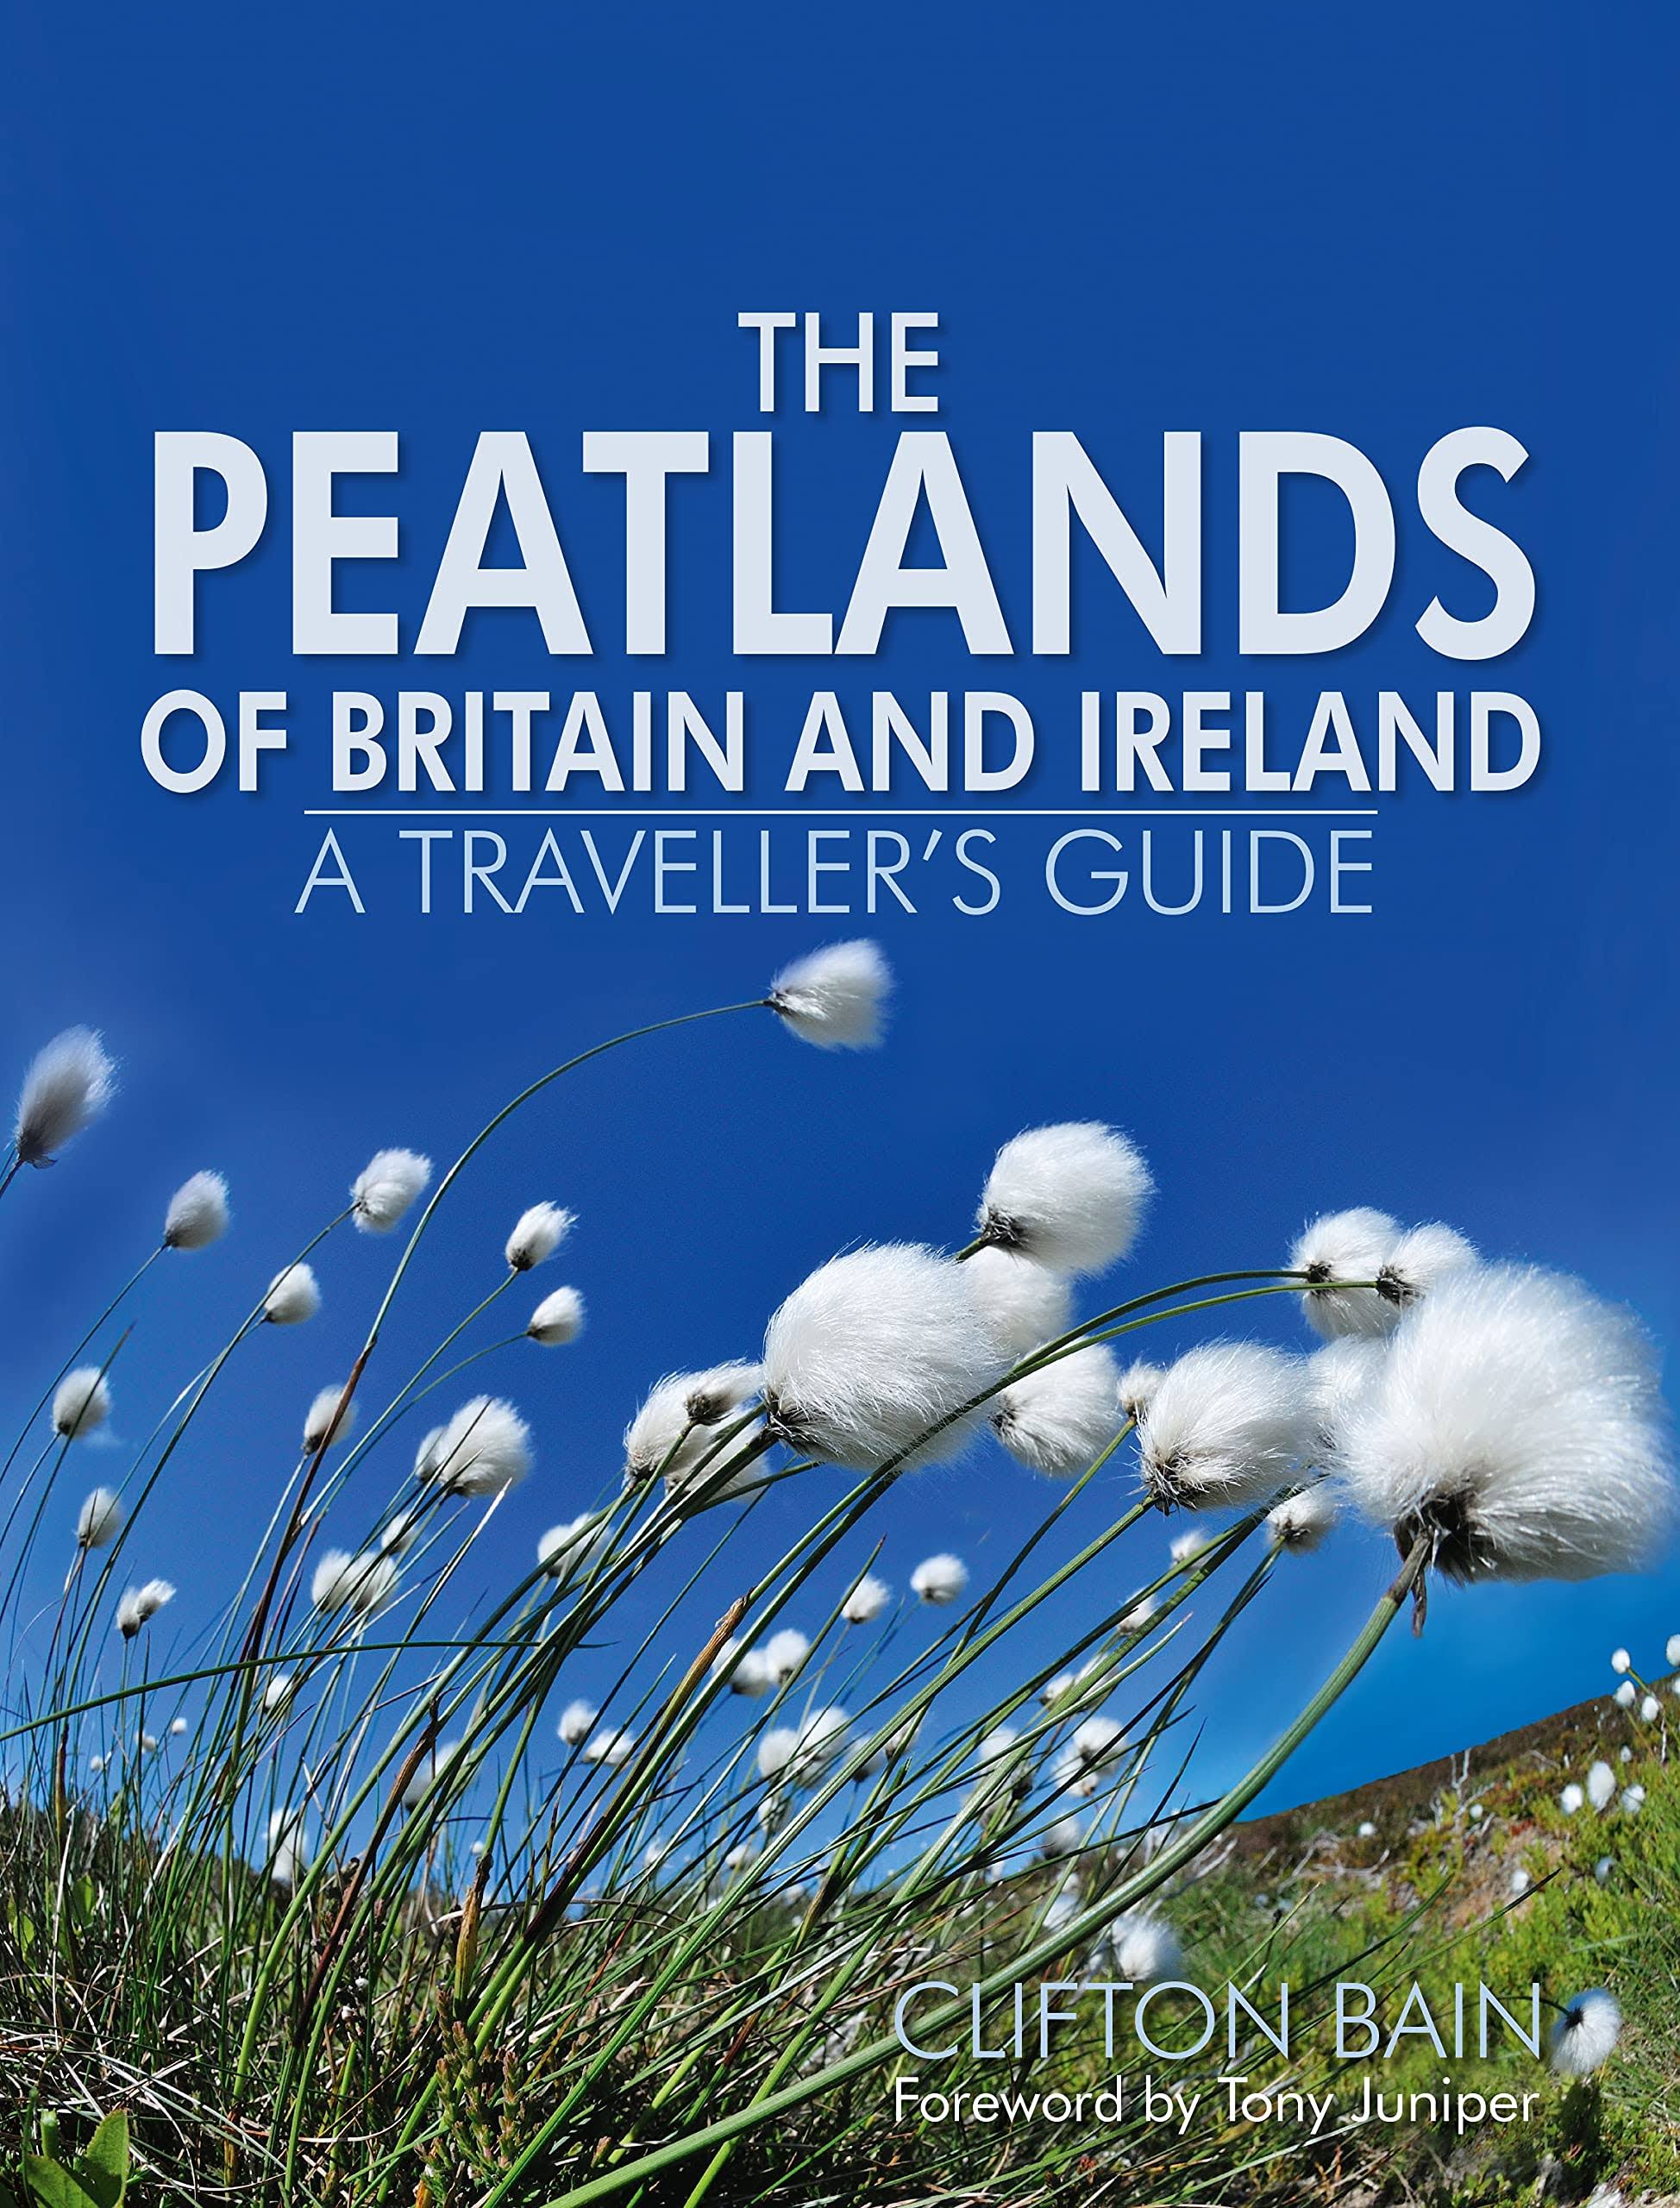 The Peatlands of Britain and Ireland [Book]